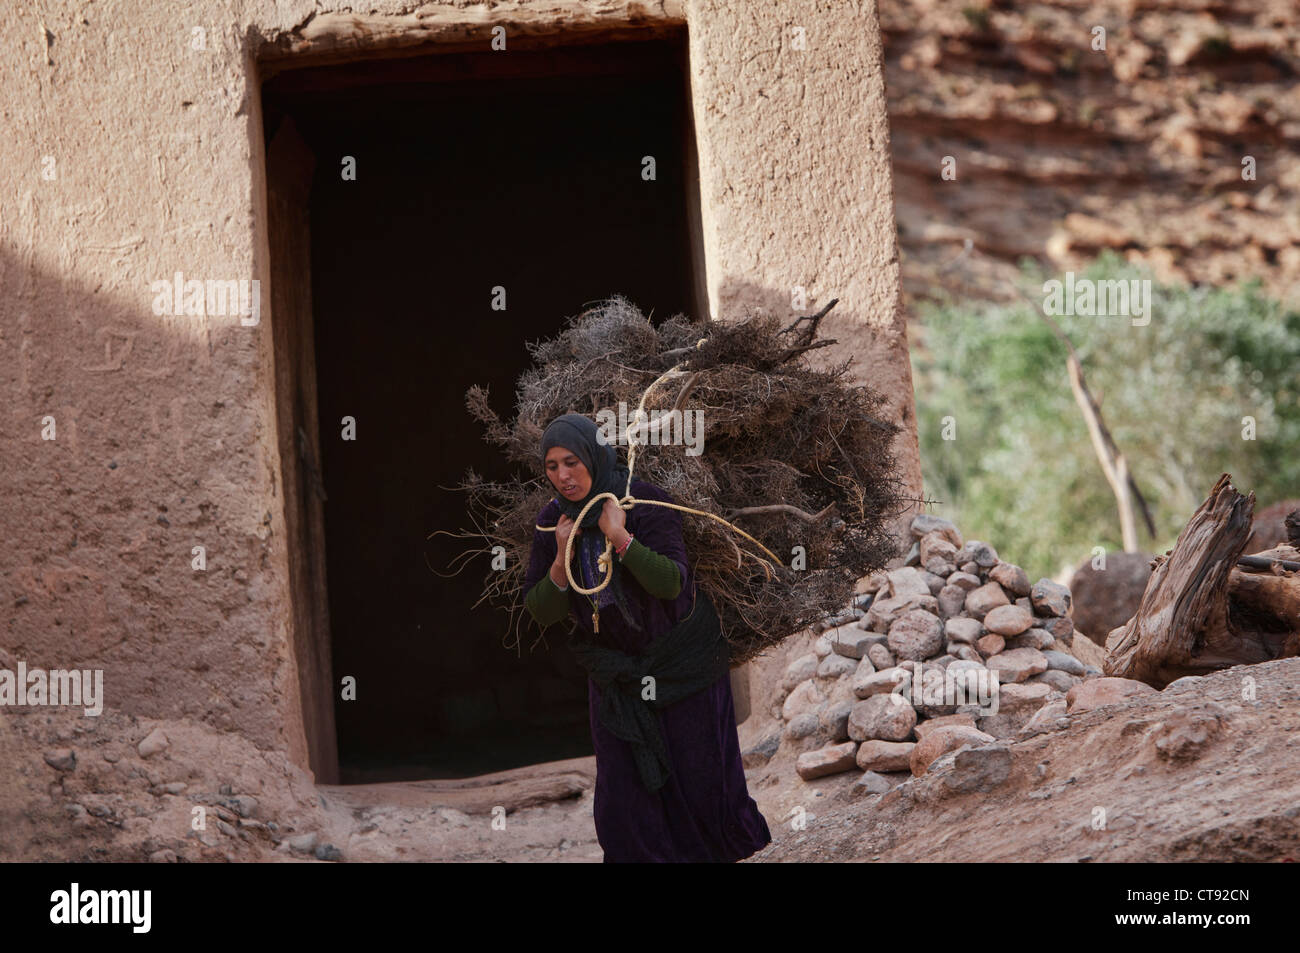 Berber woman carrying a load in the Southern Atlas Mountains, Morocco Stock Photo